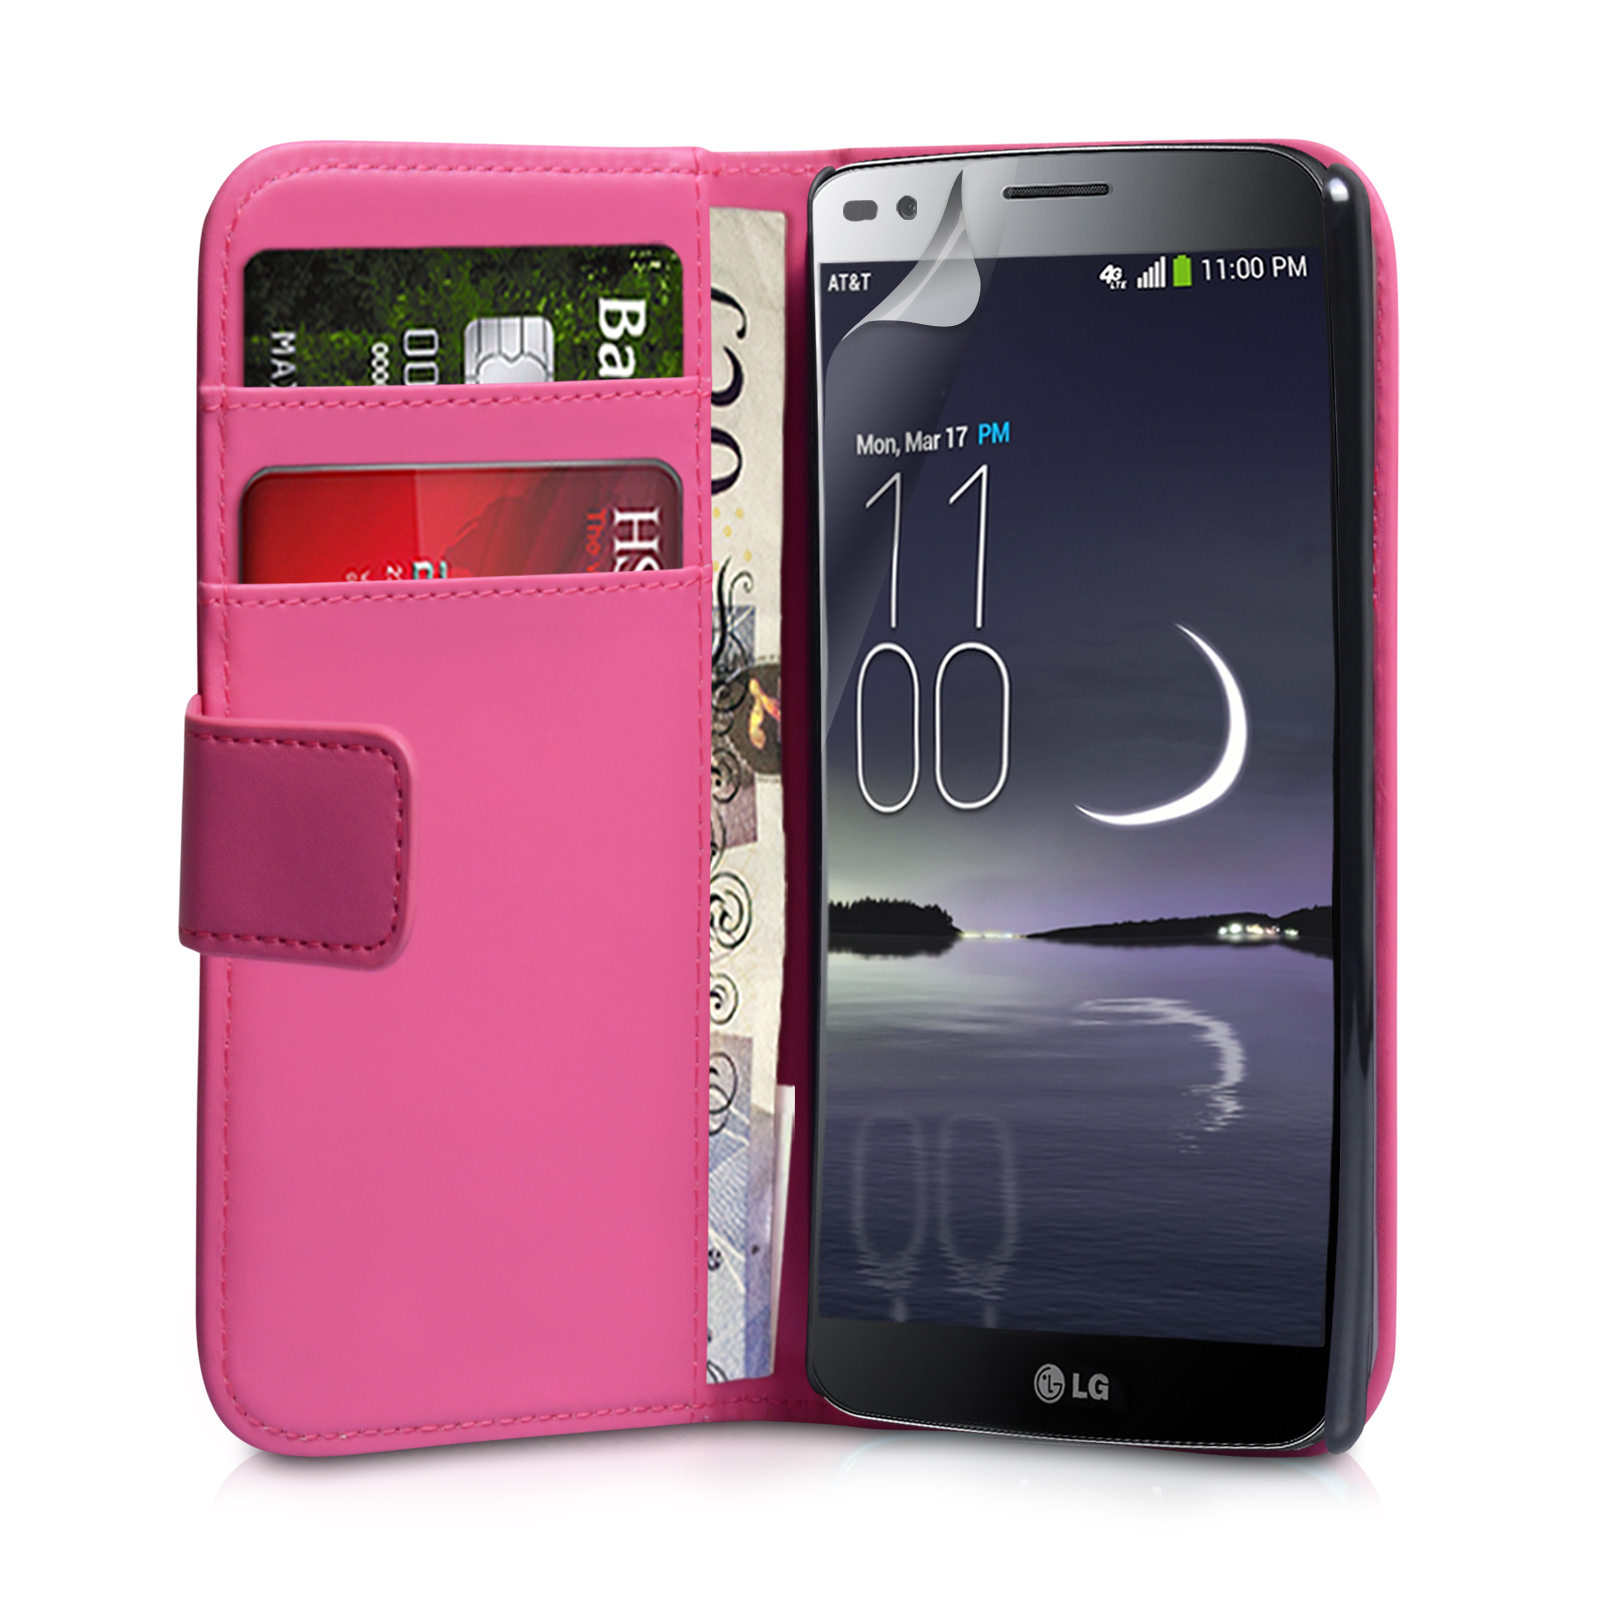 YouSave Accessories LG G Flex Leather-Effect Wallet Case - Hot Pink